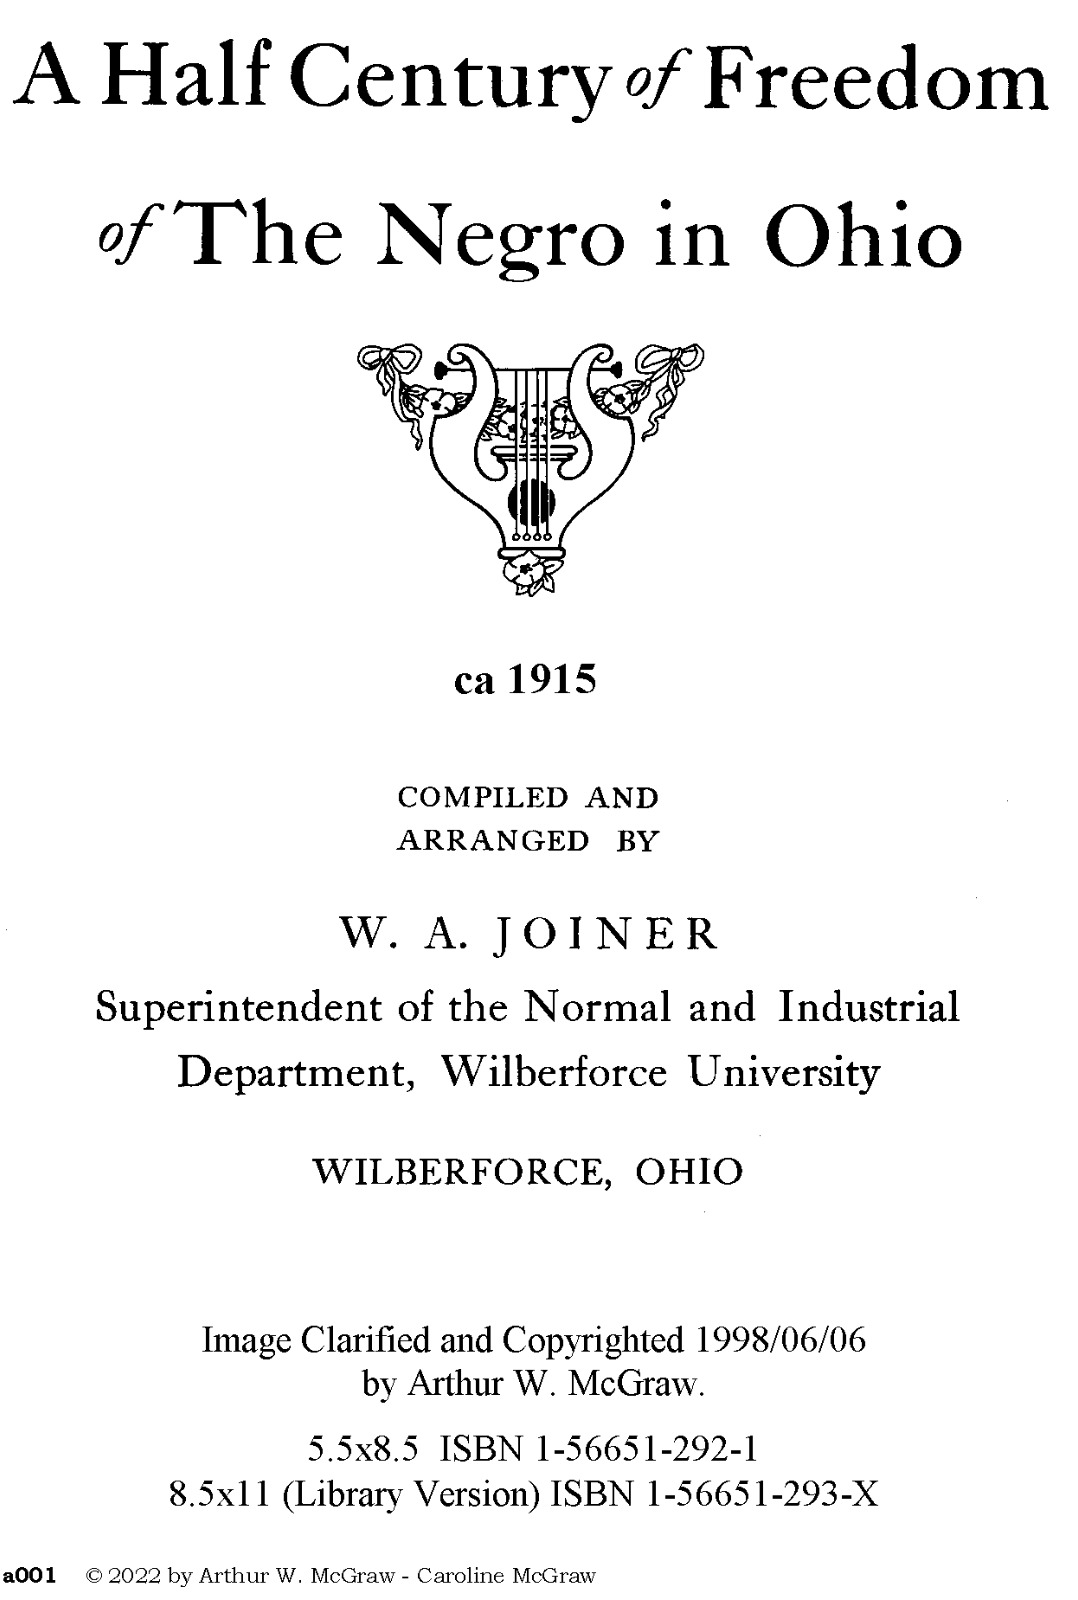 50 Years of Negro Freedom in Oh. ca1915 W. A. Joiner Wilberforce pdf